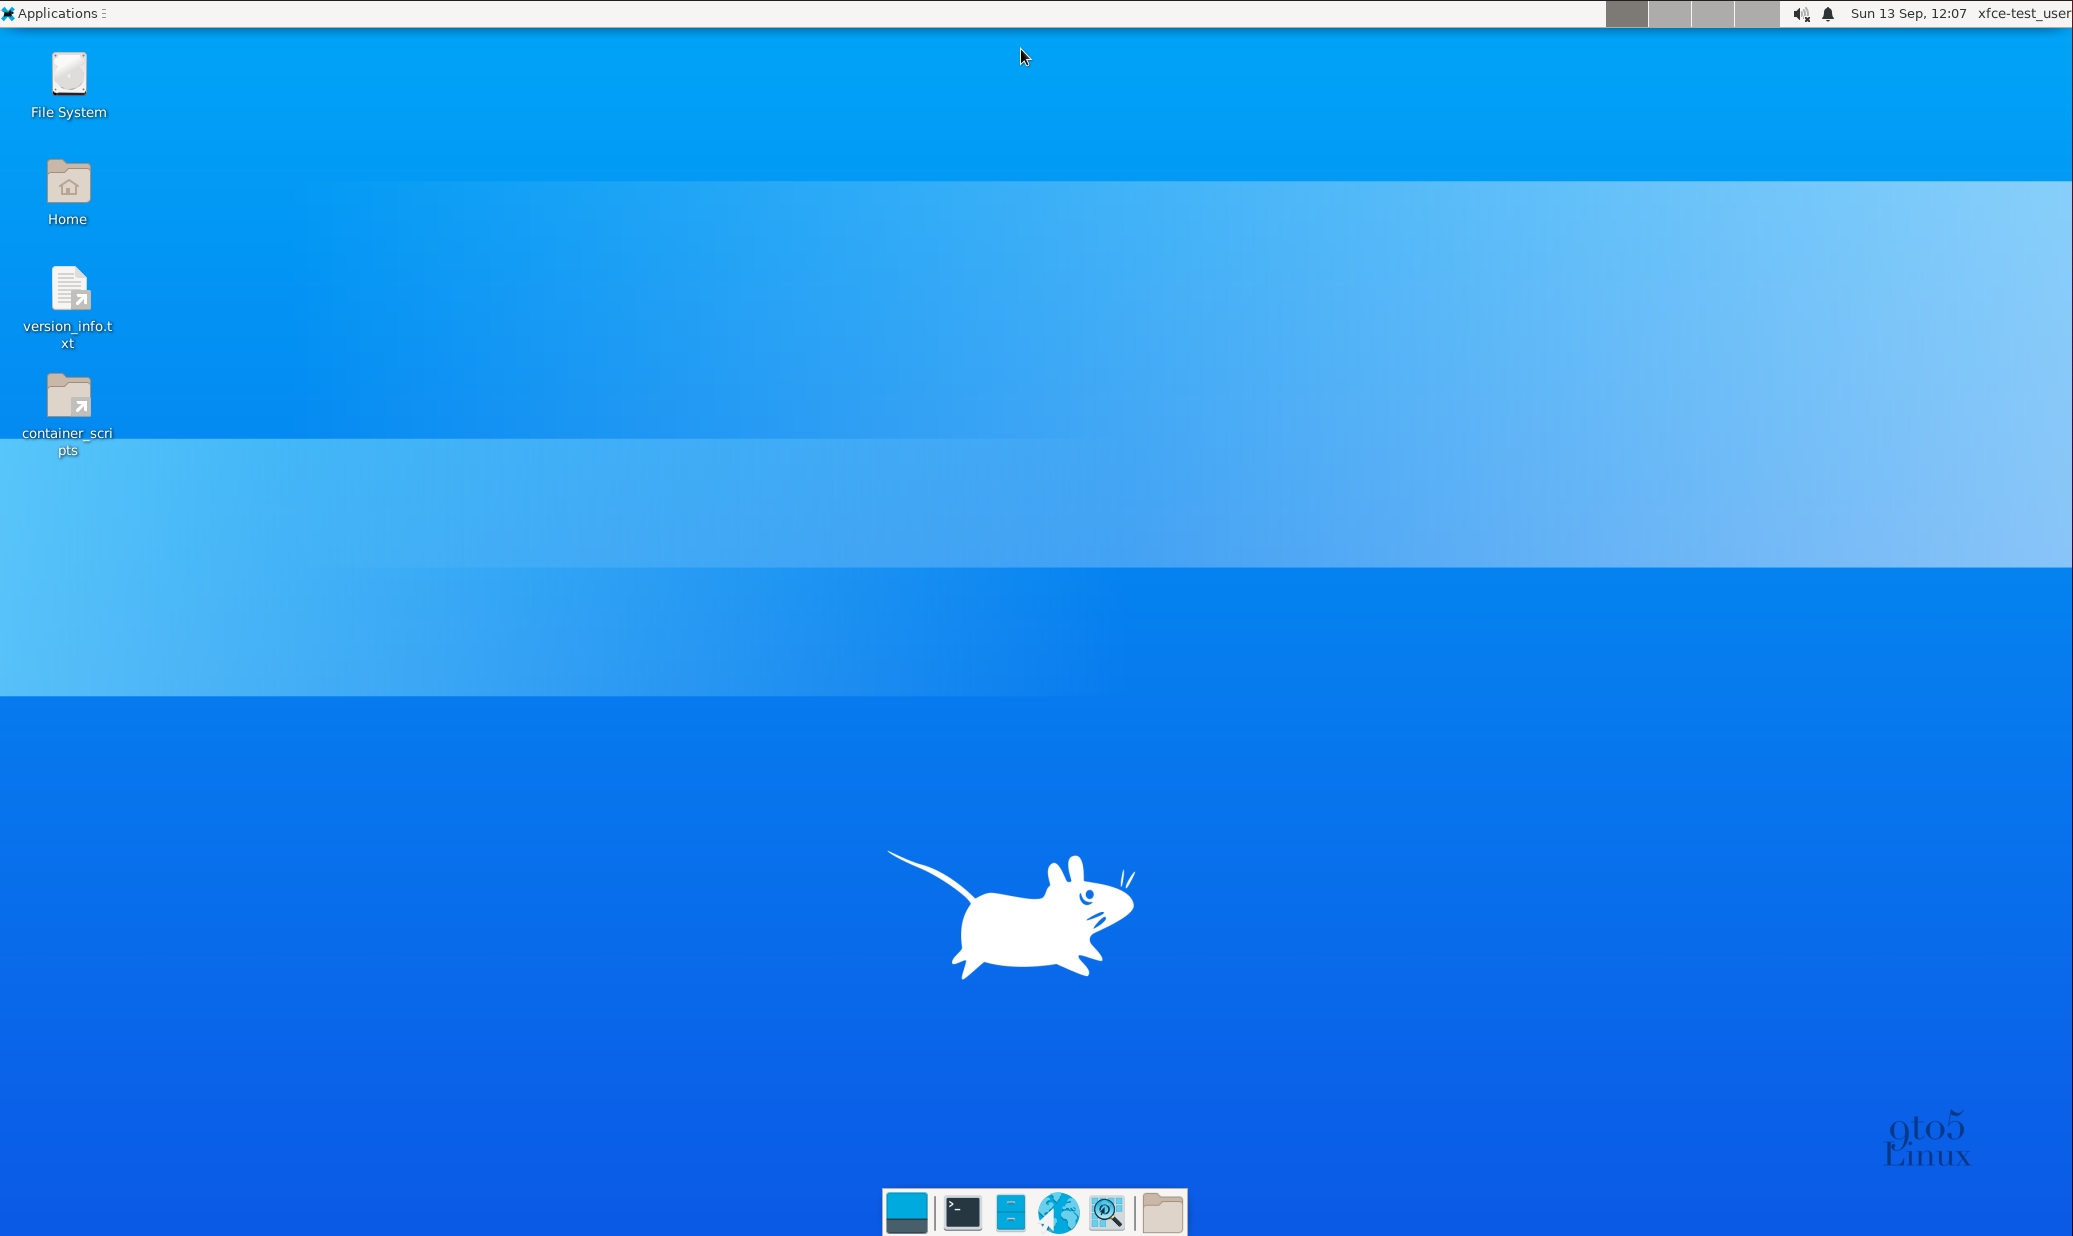 This is the XFCE desktop